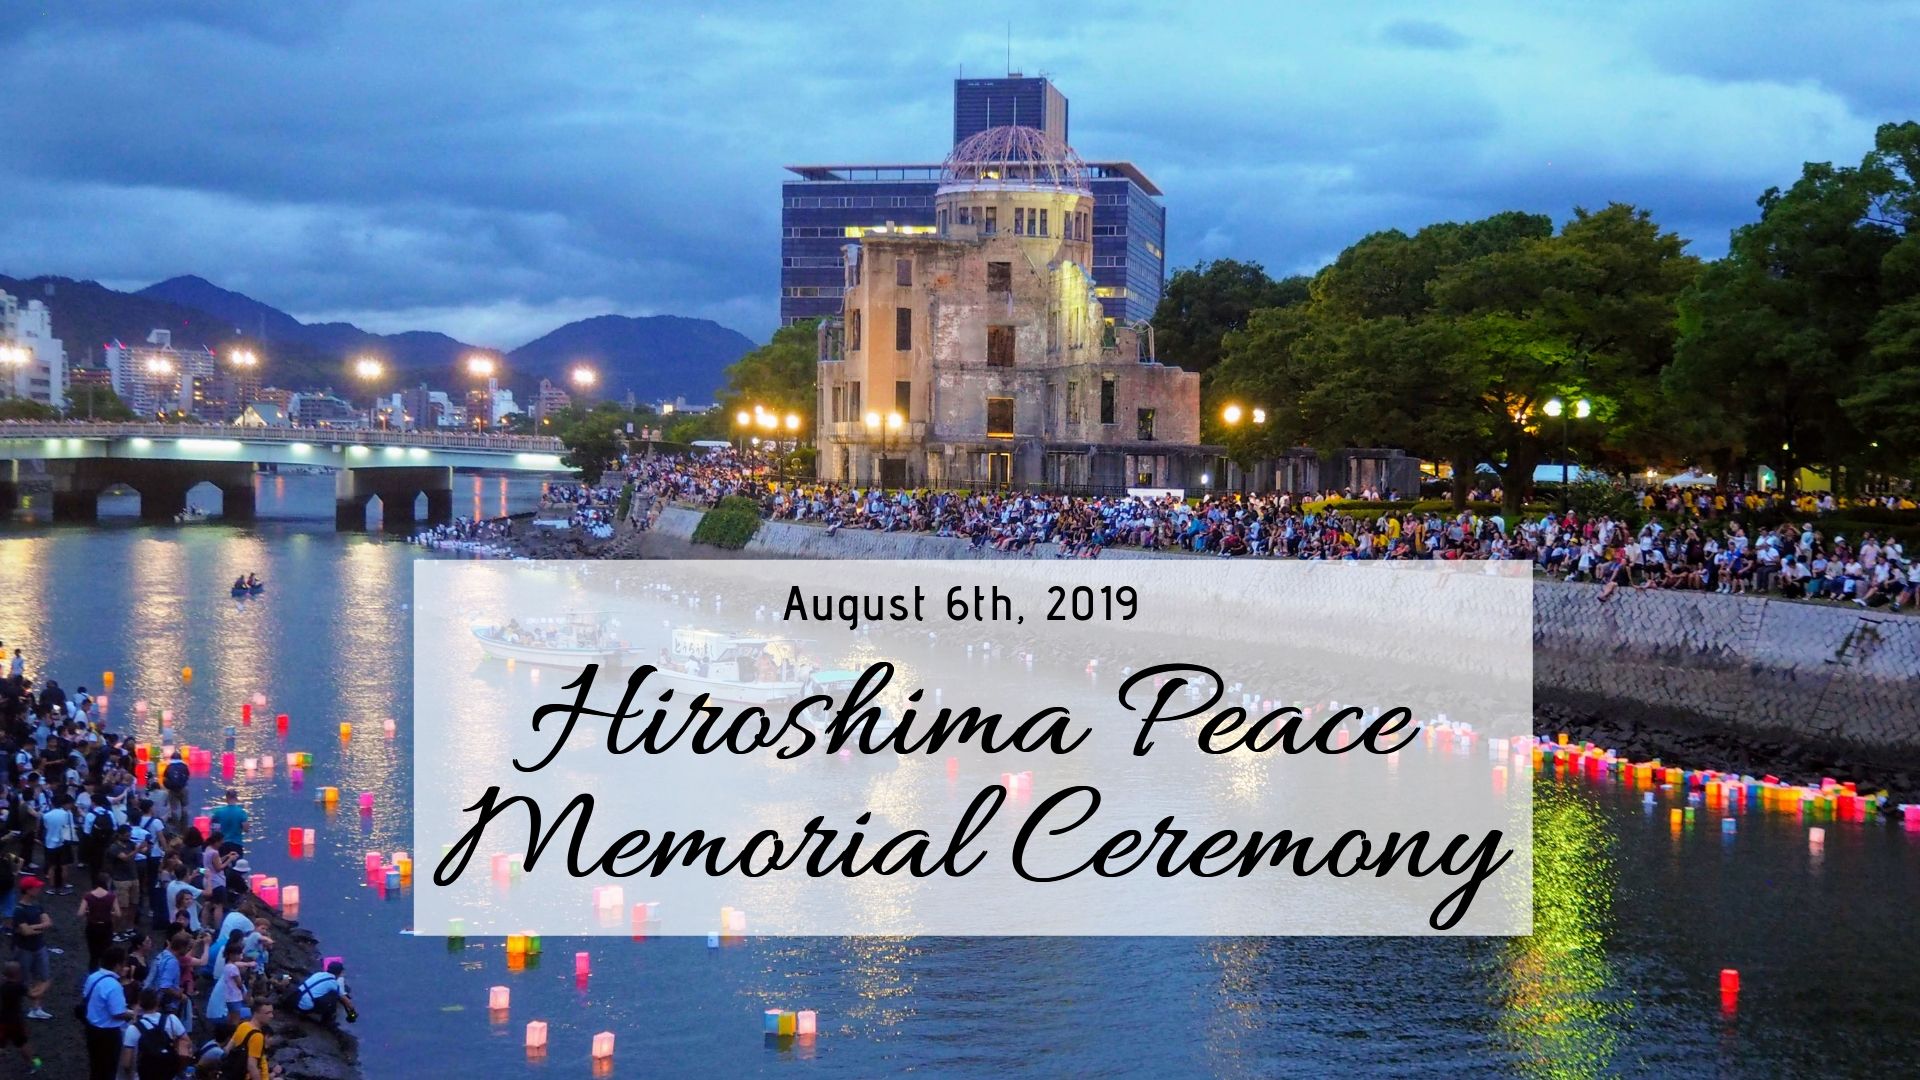 Remembering August 6th, 1945 – The Hiroshima Peace Memorial Ceremony